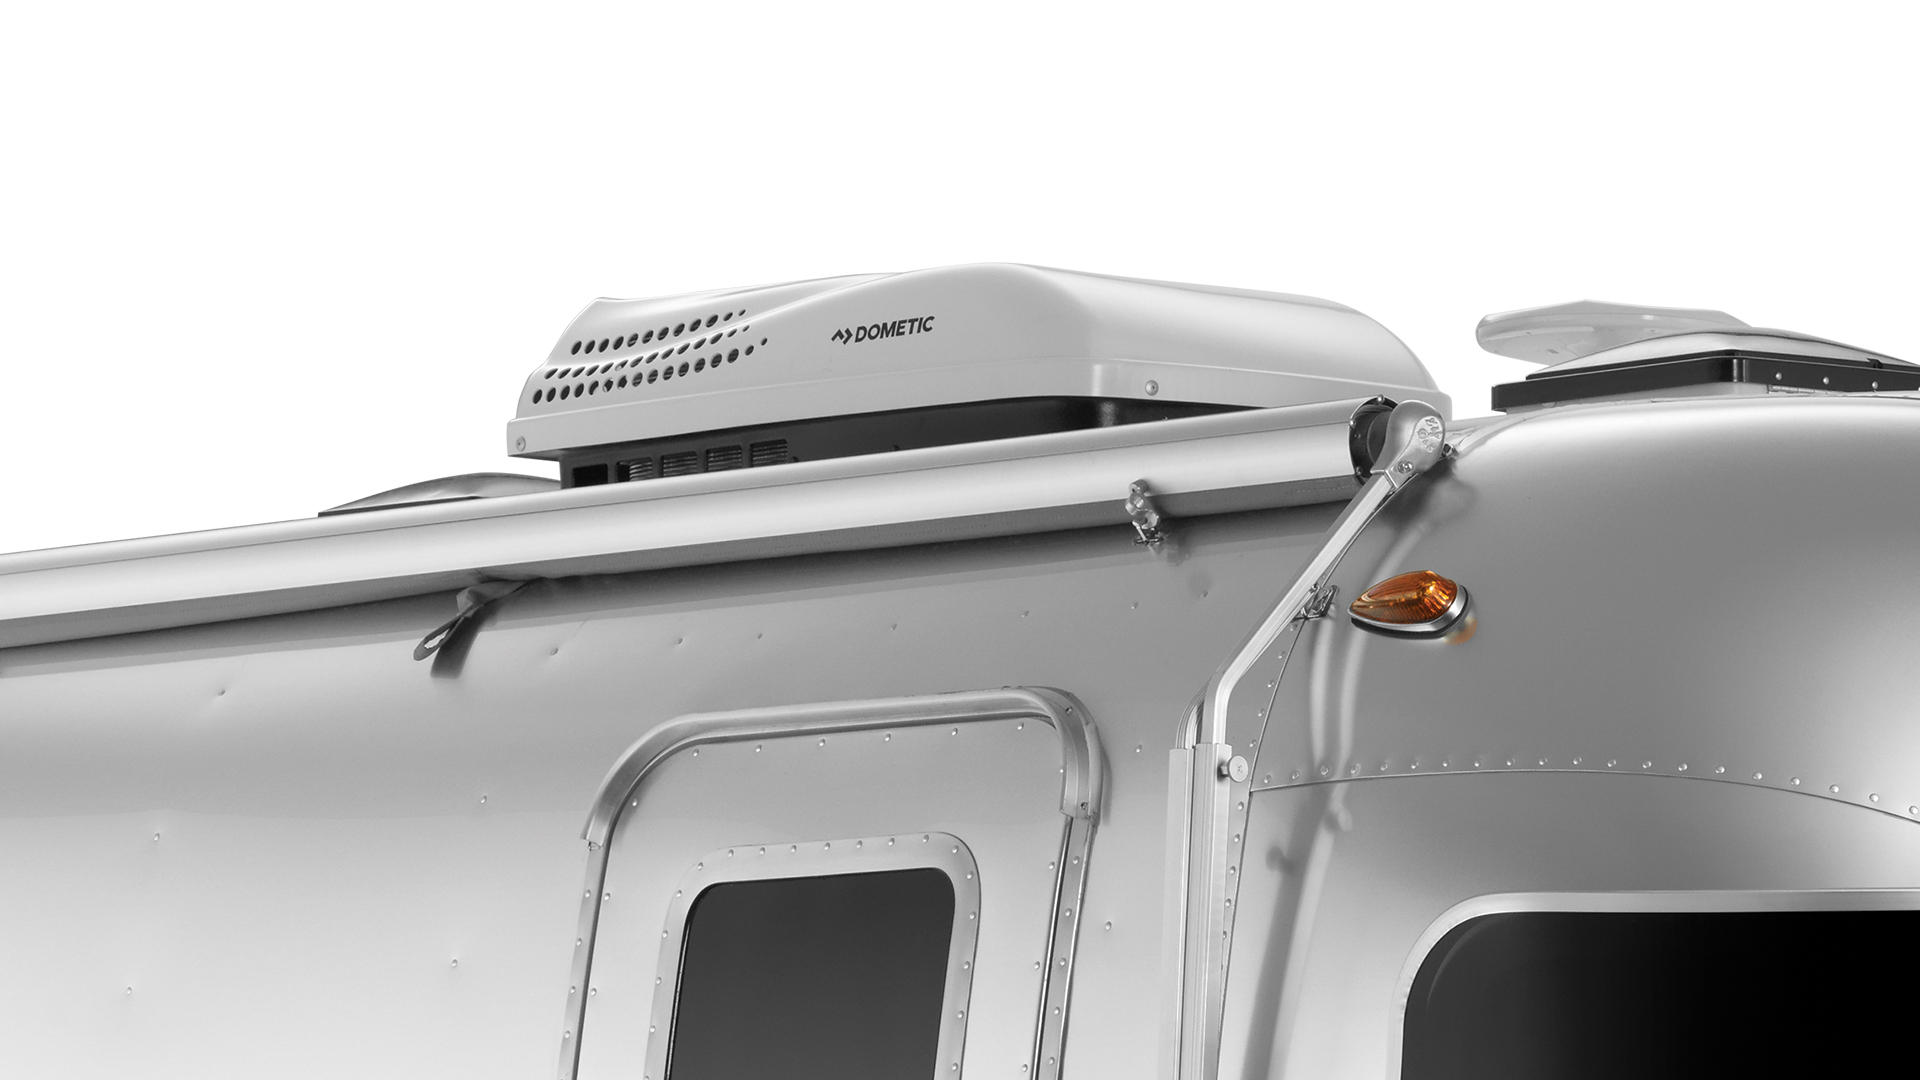 An air conditioner on the roof of an Airstream Bambi travel trailer